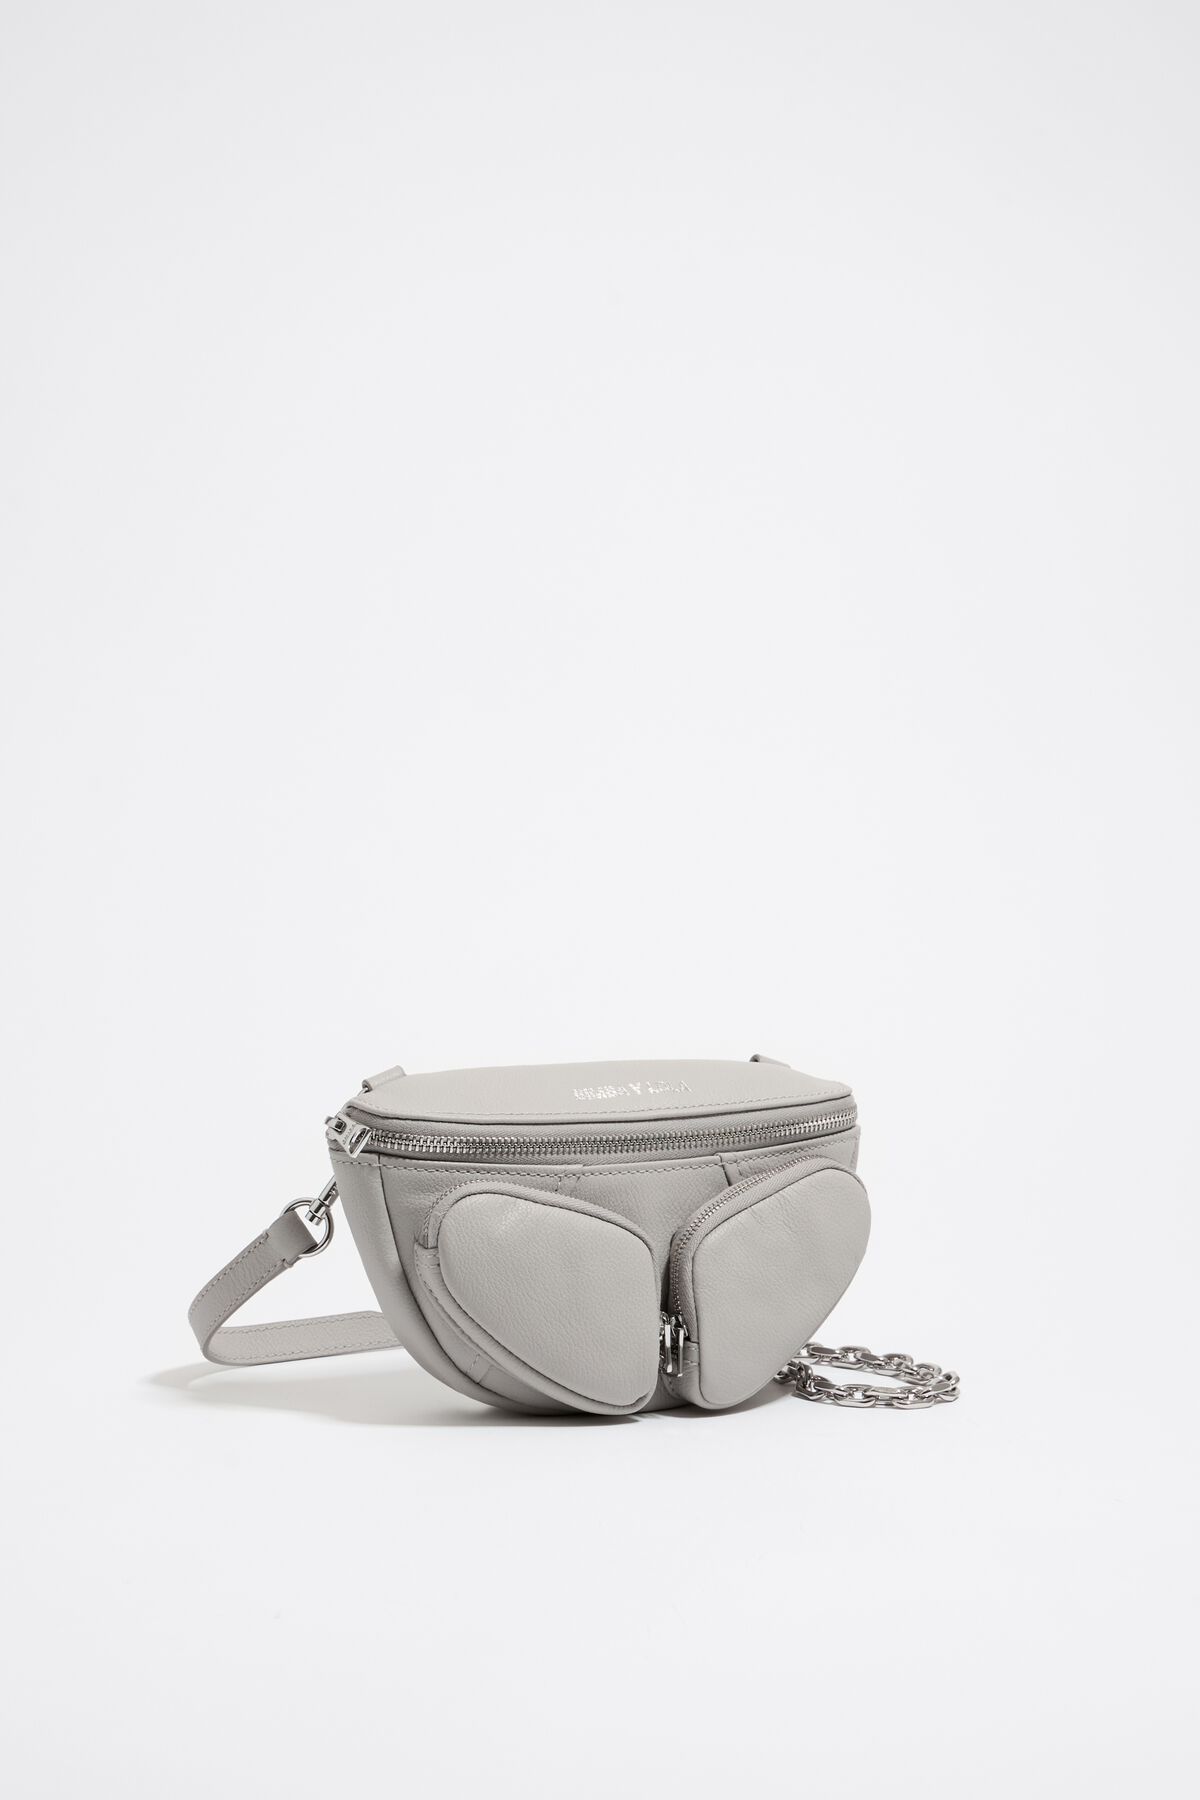 XS silver leather Pocket slouch bag